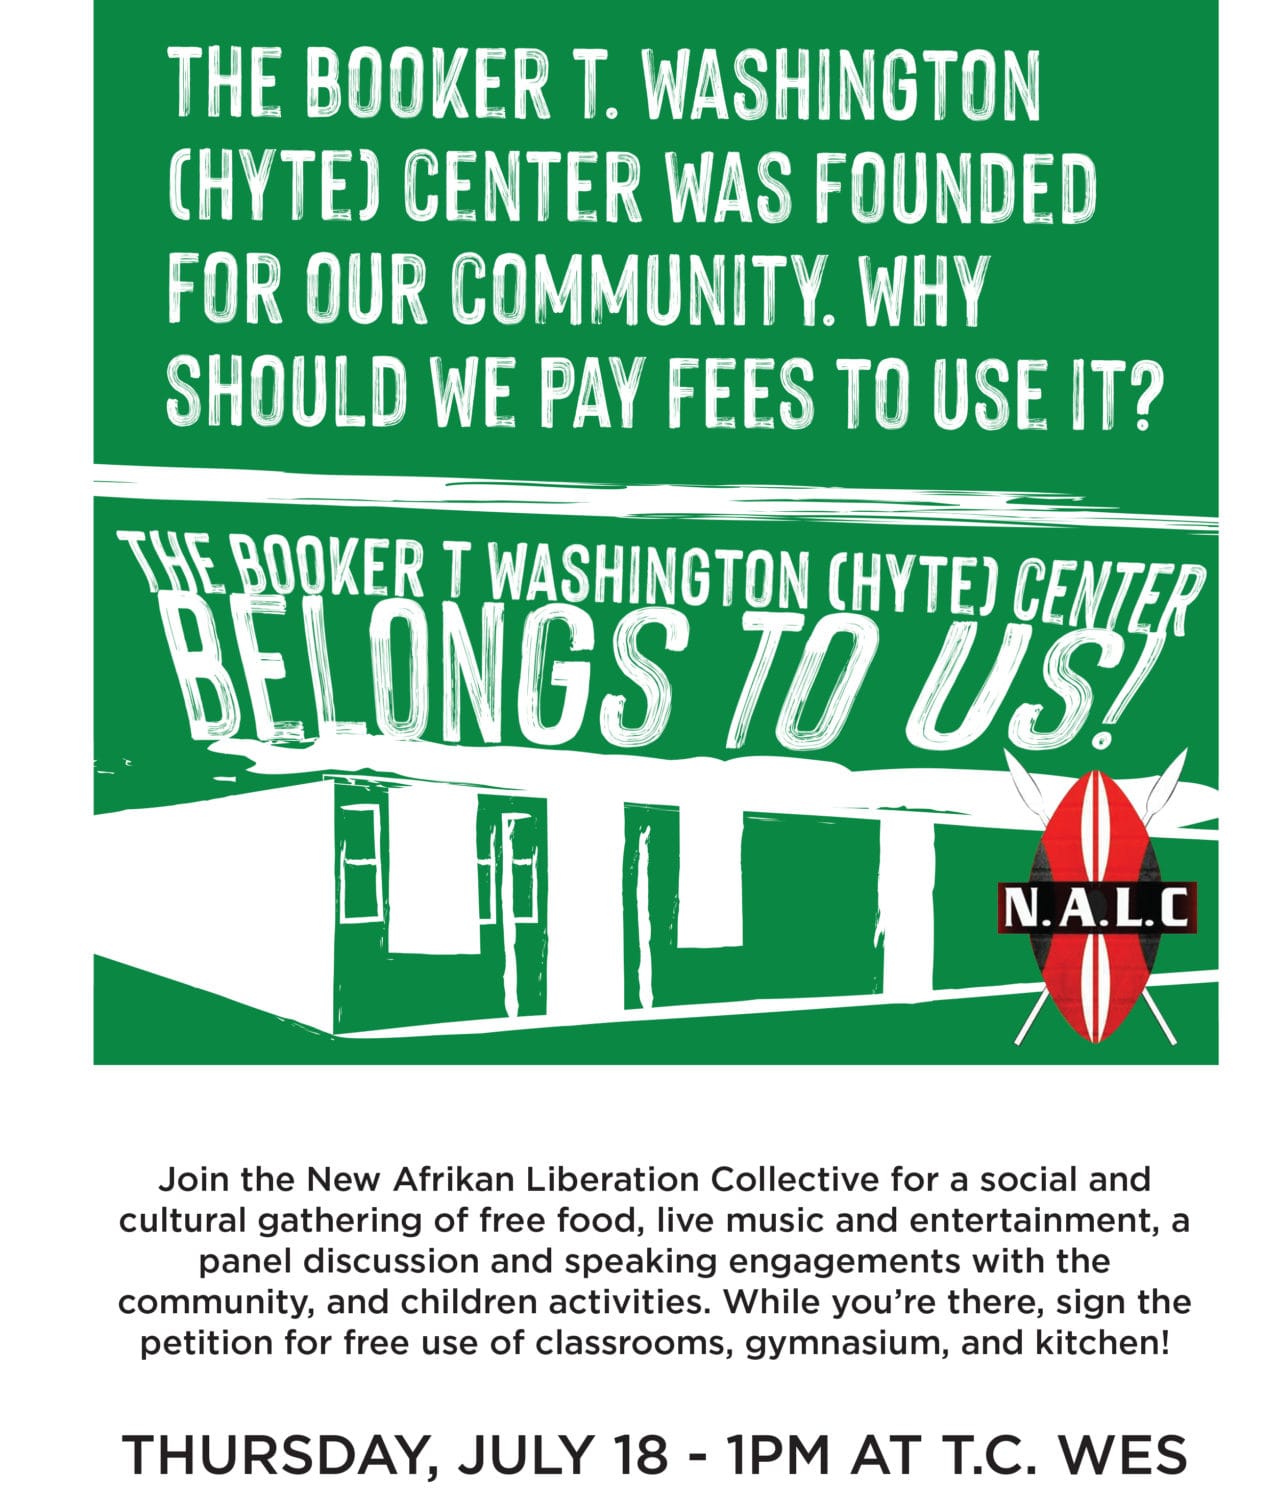 The-Booker-T.-Washington-Center-belongs-to-us-NALC-poster-for-Peoples-Assembly-Terre-Haute-071820, Second annual People’s Assembly: Revolution vs. reactionary reformism, Abolition Now! 